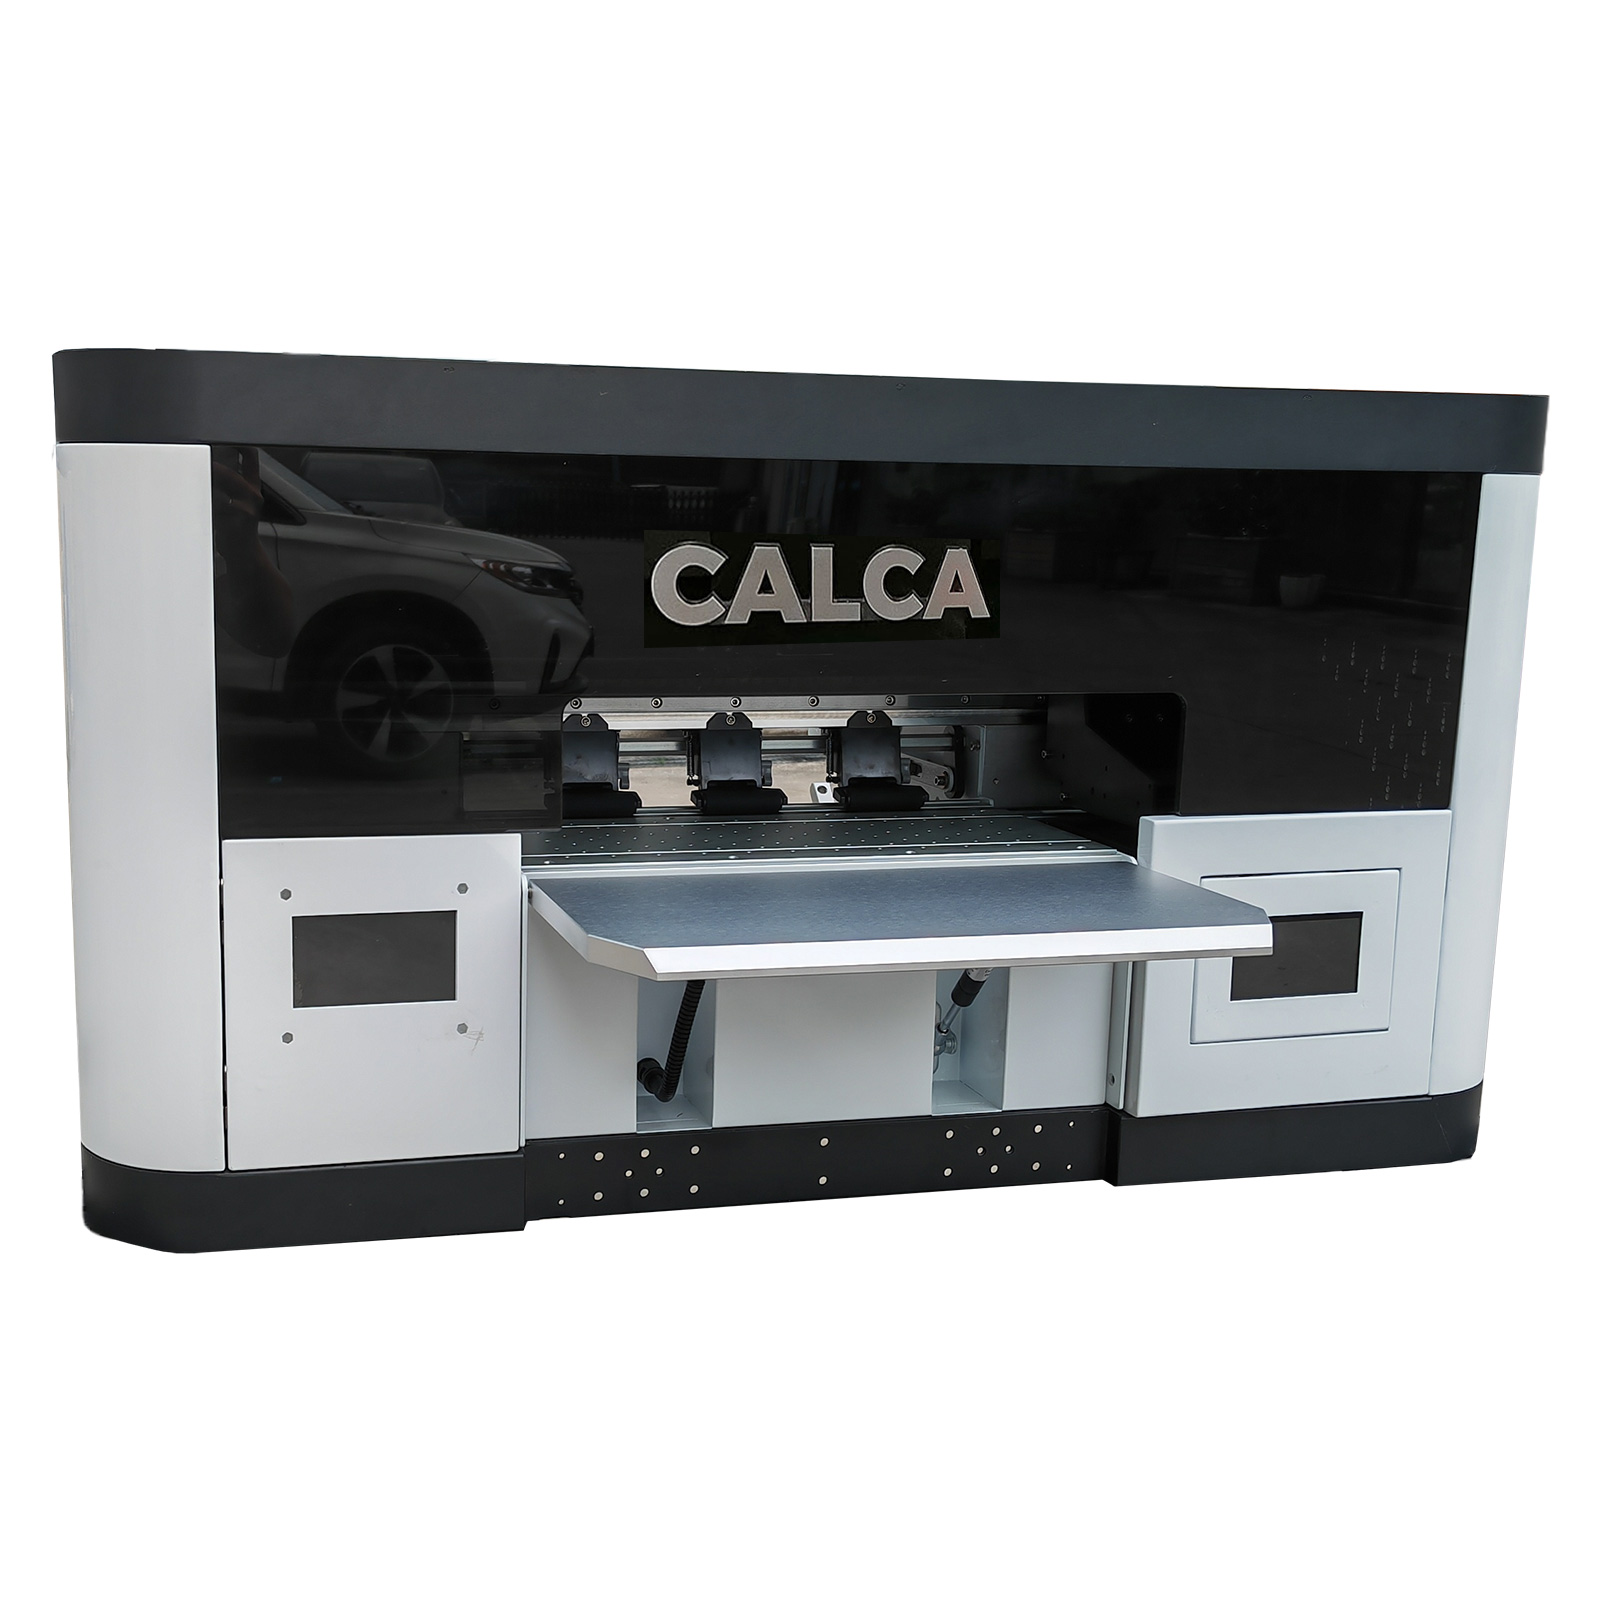 CALCA ProStar13 DTF Printer With Installed Dual Epson F1080-A1 (XP-600) Printheads